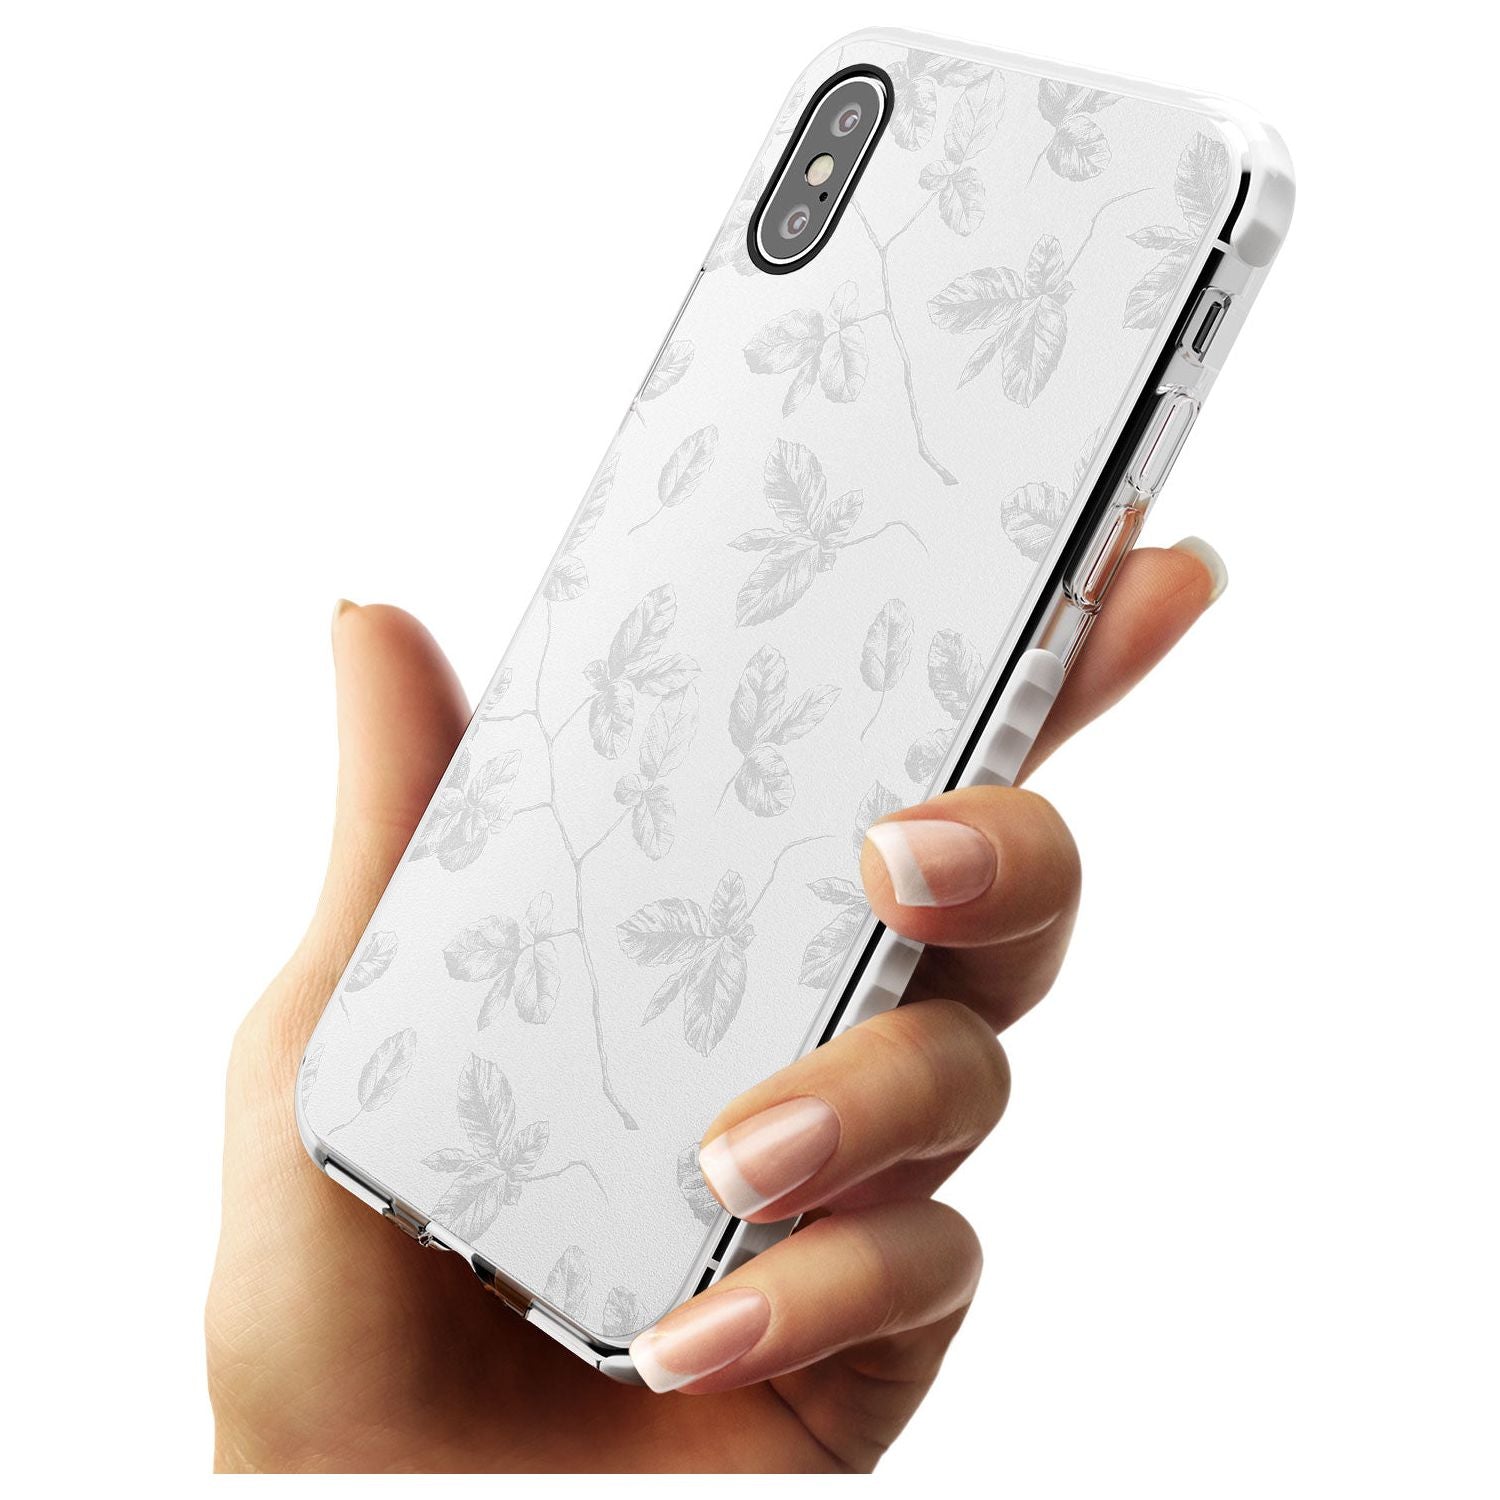 Grey Branches Vintage Botanical Impact Phone Case for iPhone X XS Max XR